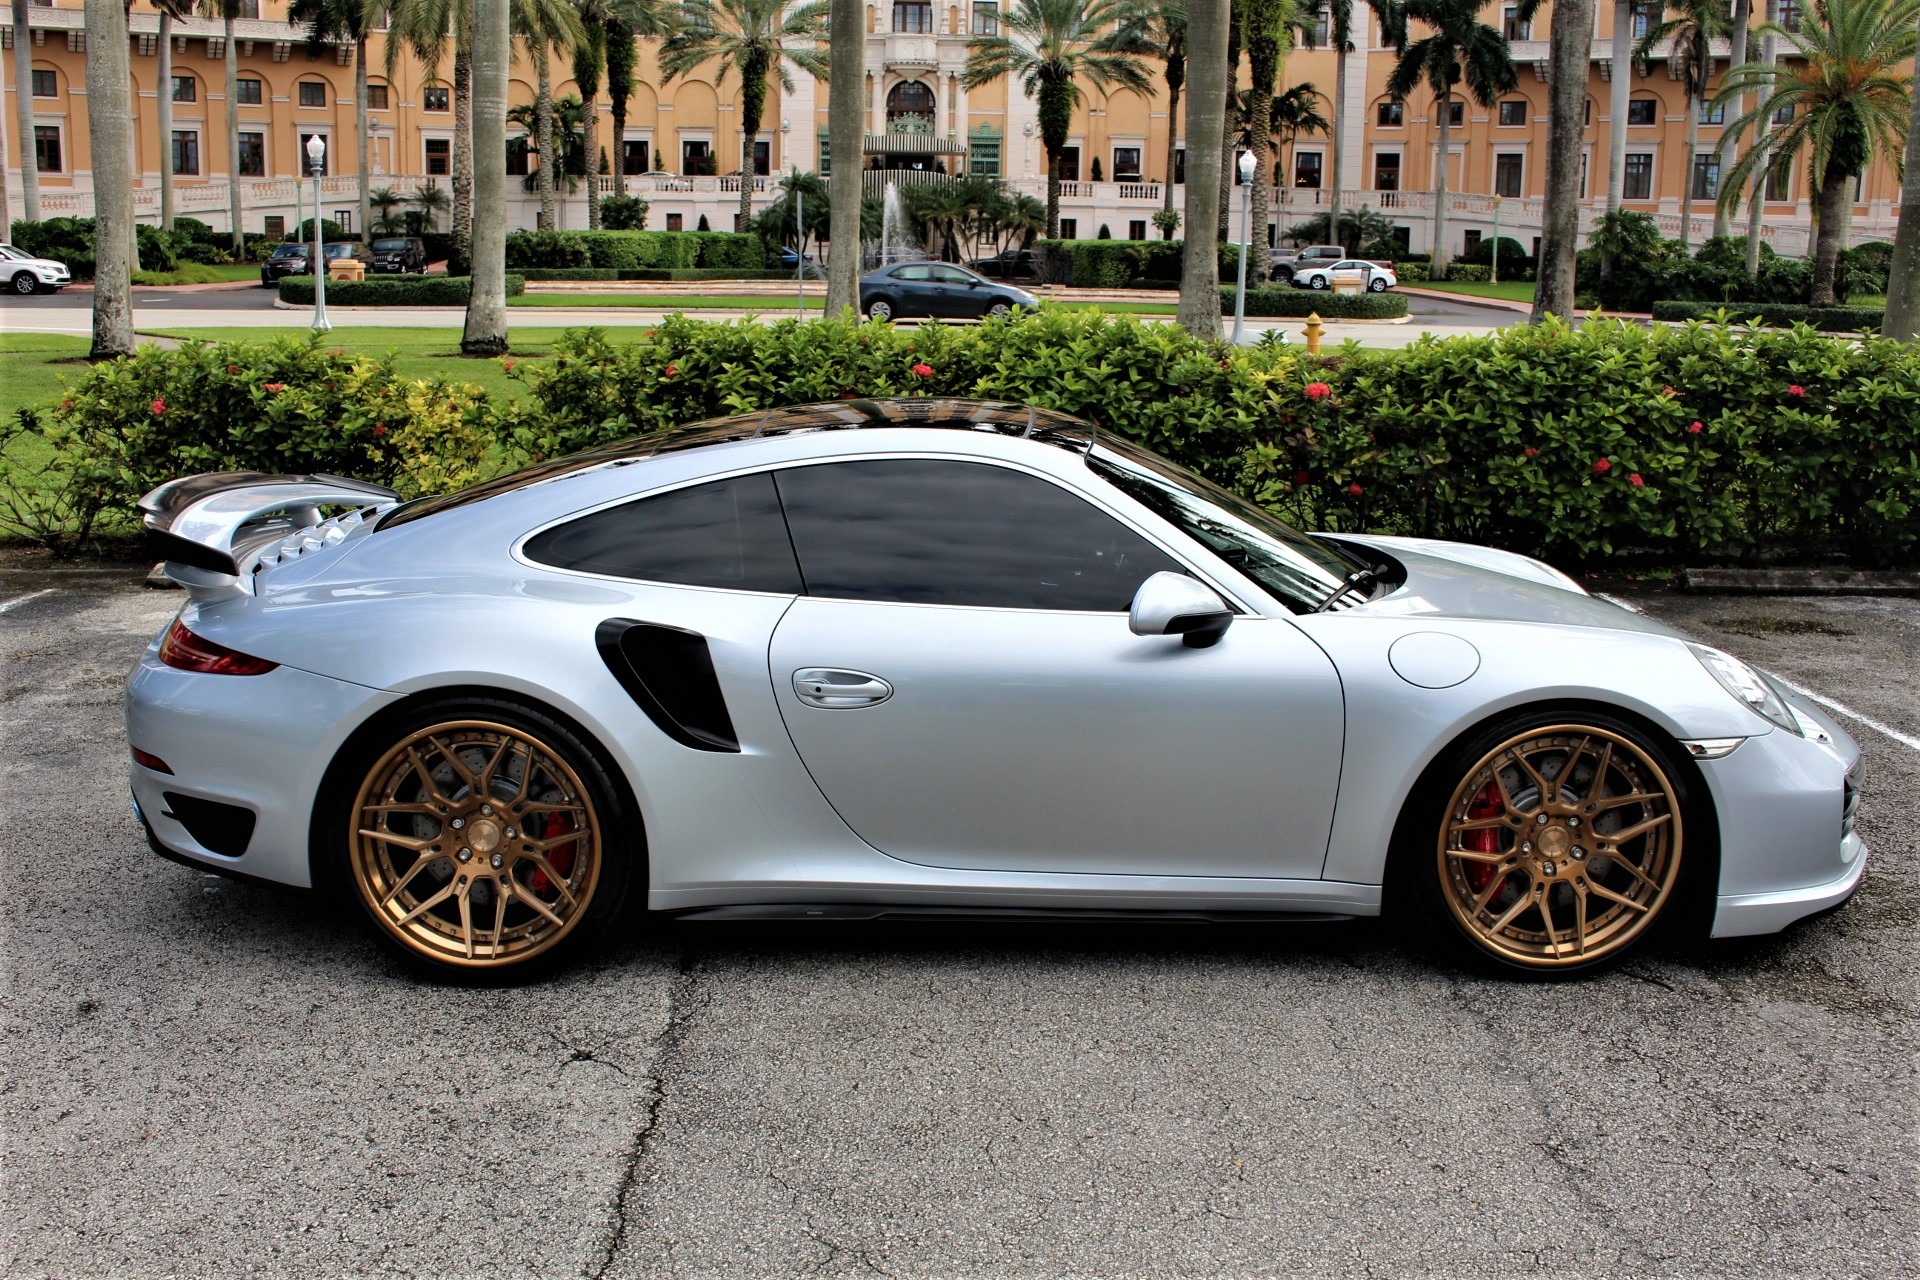 Used 2016 Porsche 911 Turbo for sale Sold at The Gables Sports Cars in Miami FL 33146 2